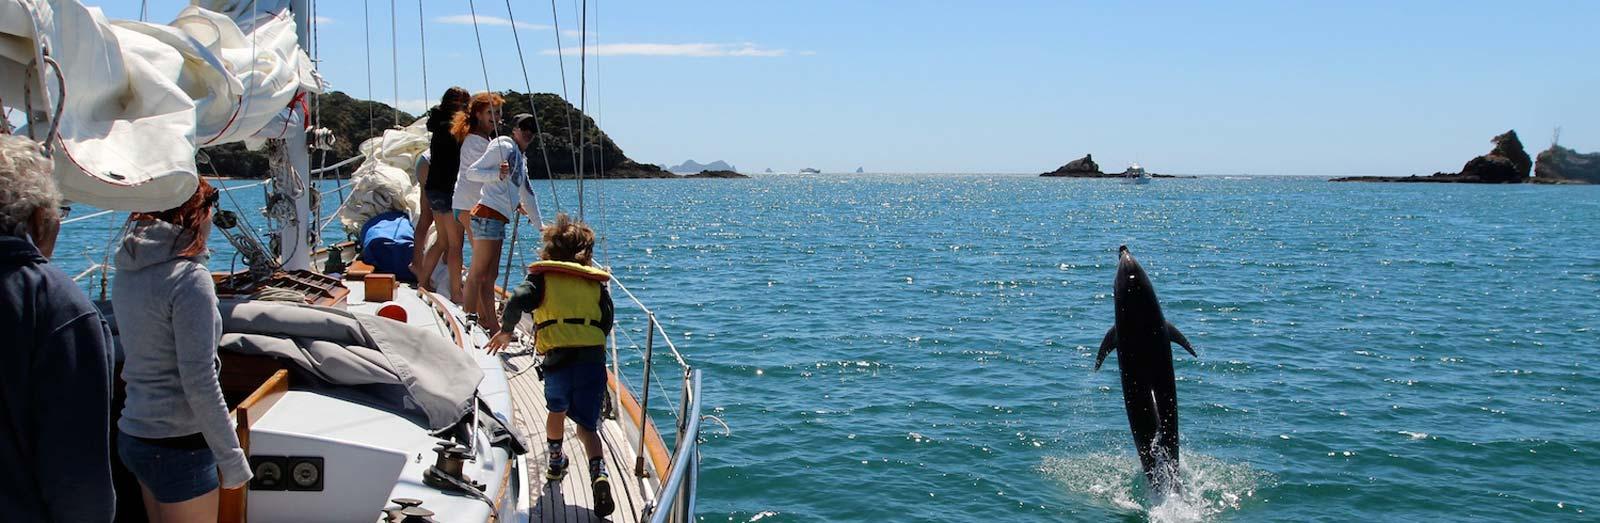 Sailing crew dolphin spotting in the Bay of Islands.